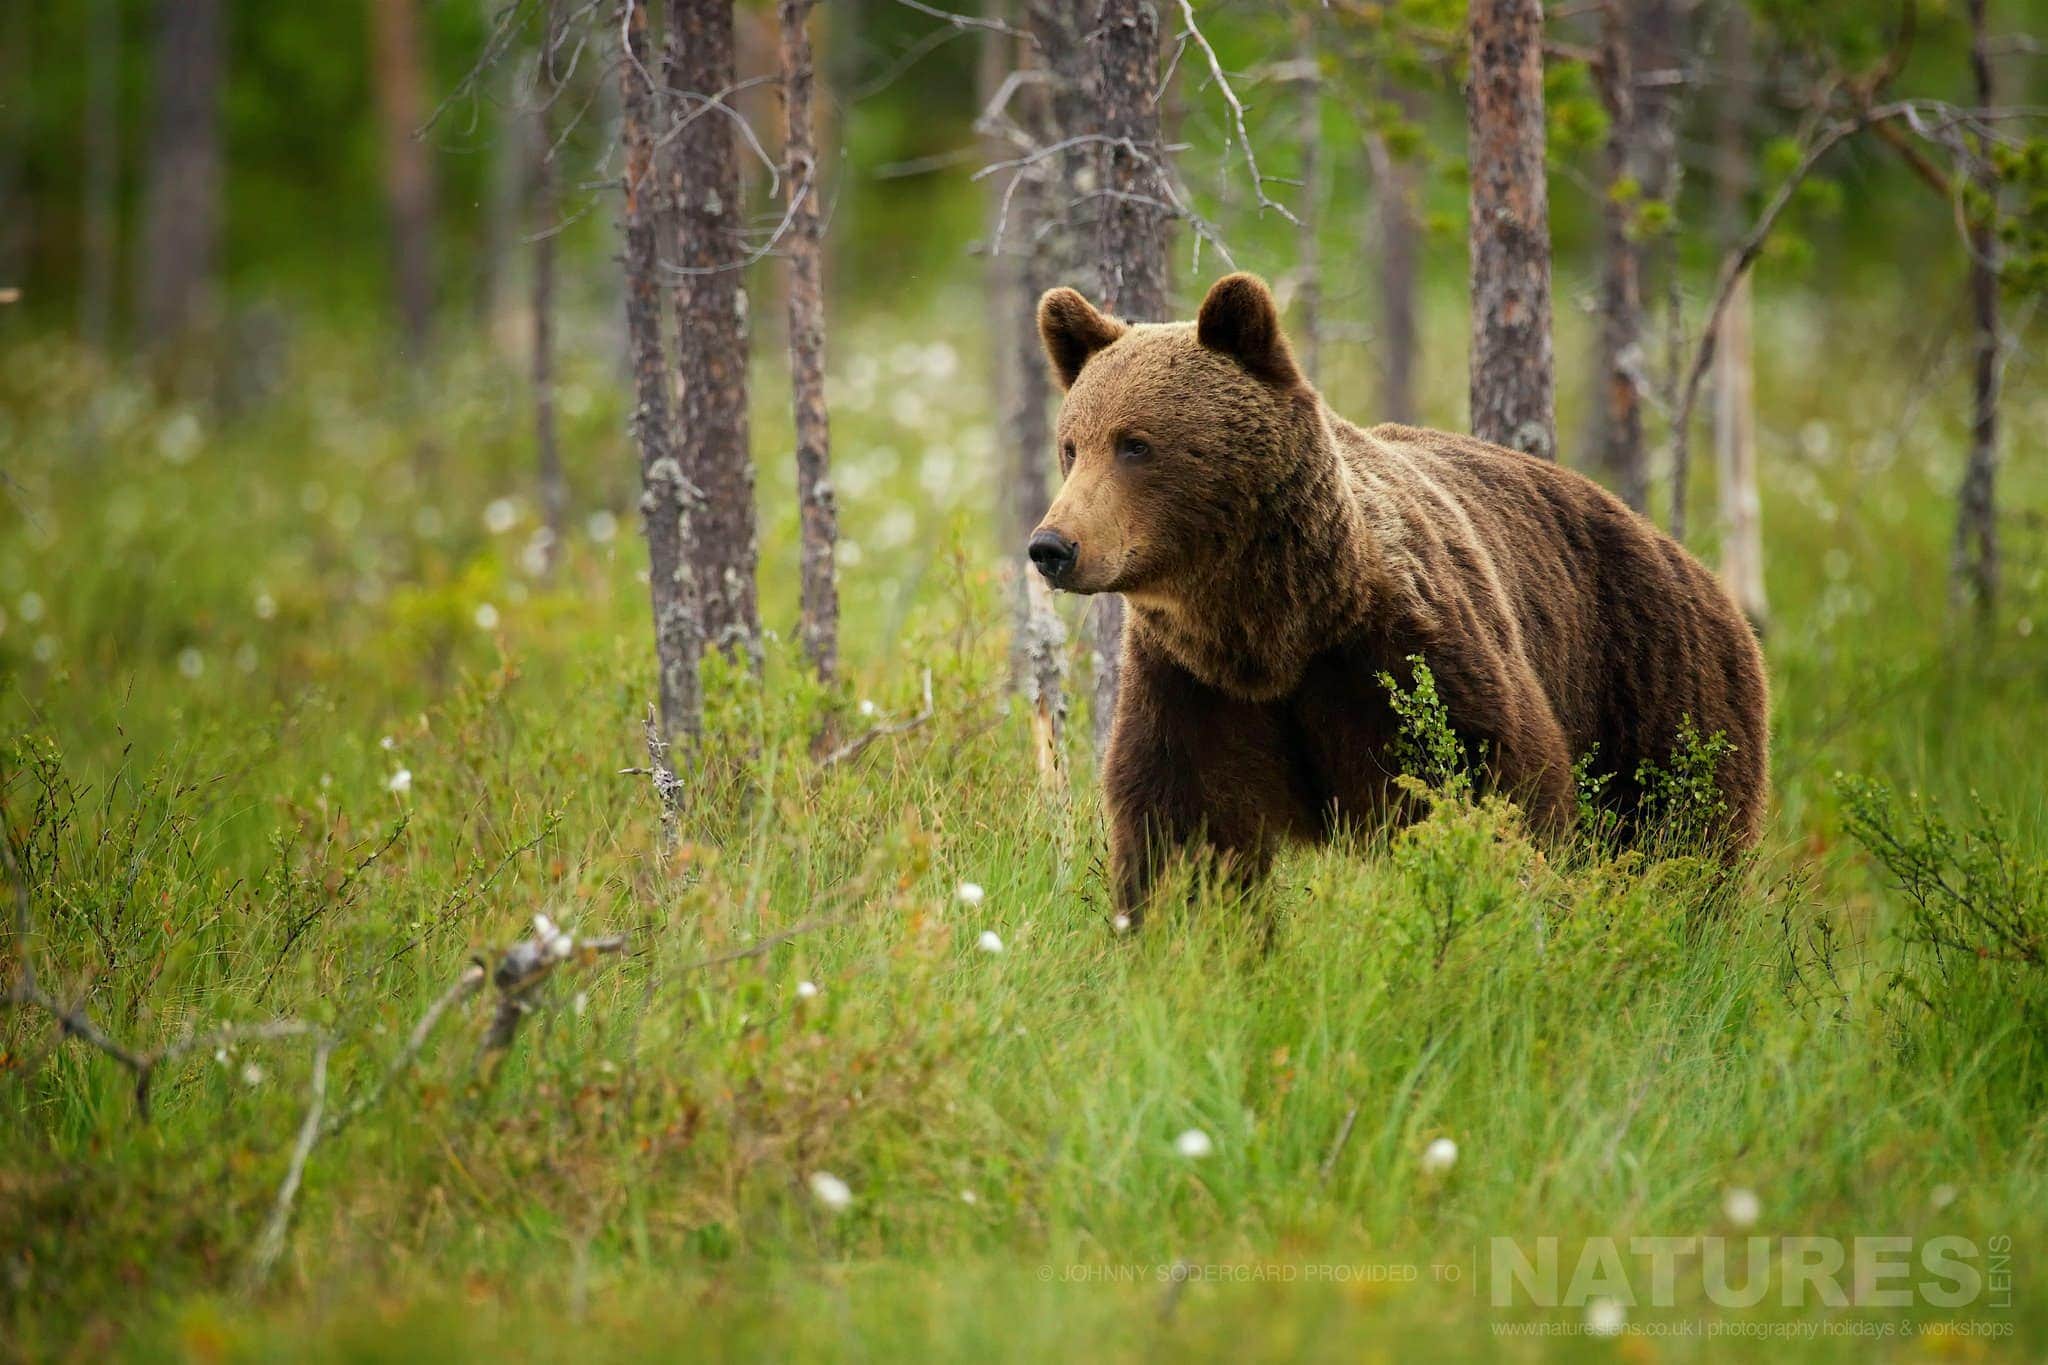 A Large Wild Brown Bear Emerges From The Russian Forests Photographed By Johnny Södergård During The Natureslens Wild Brown Bears Of Finland Photography Holiday